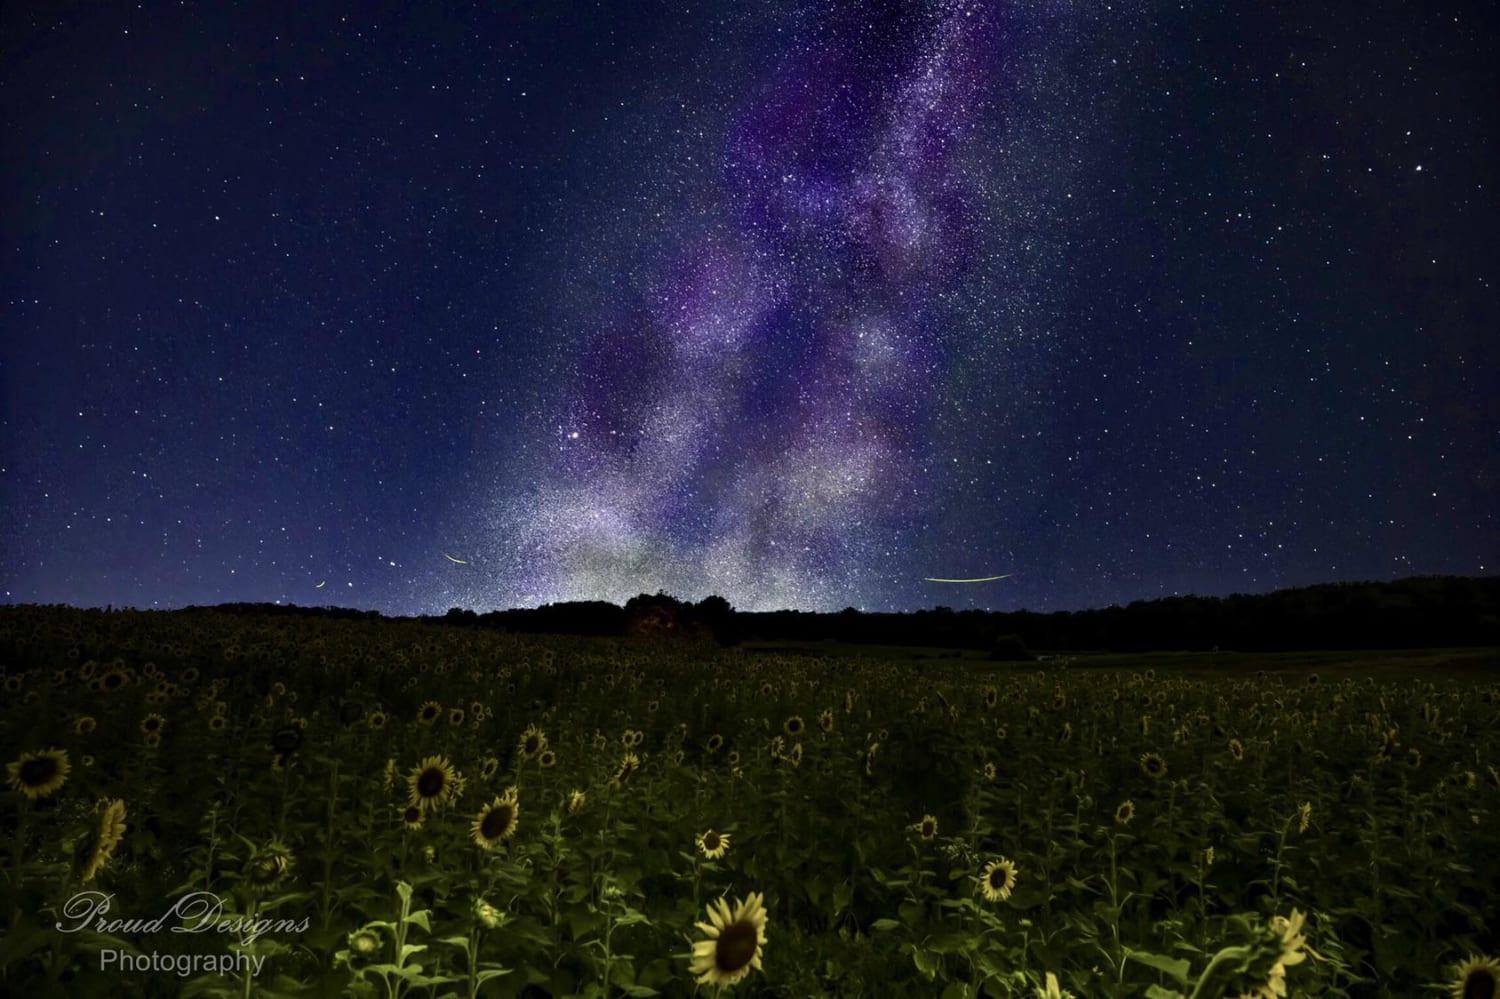 The Milky Way over a sunflower field with fire flies darting throughout the sky.